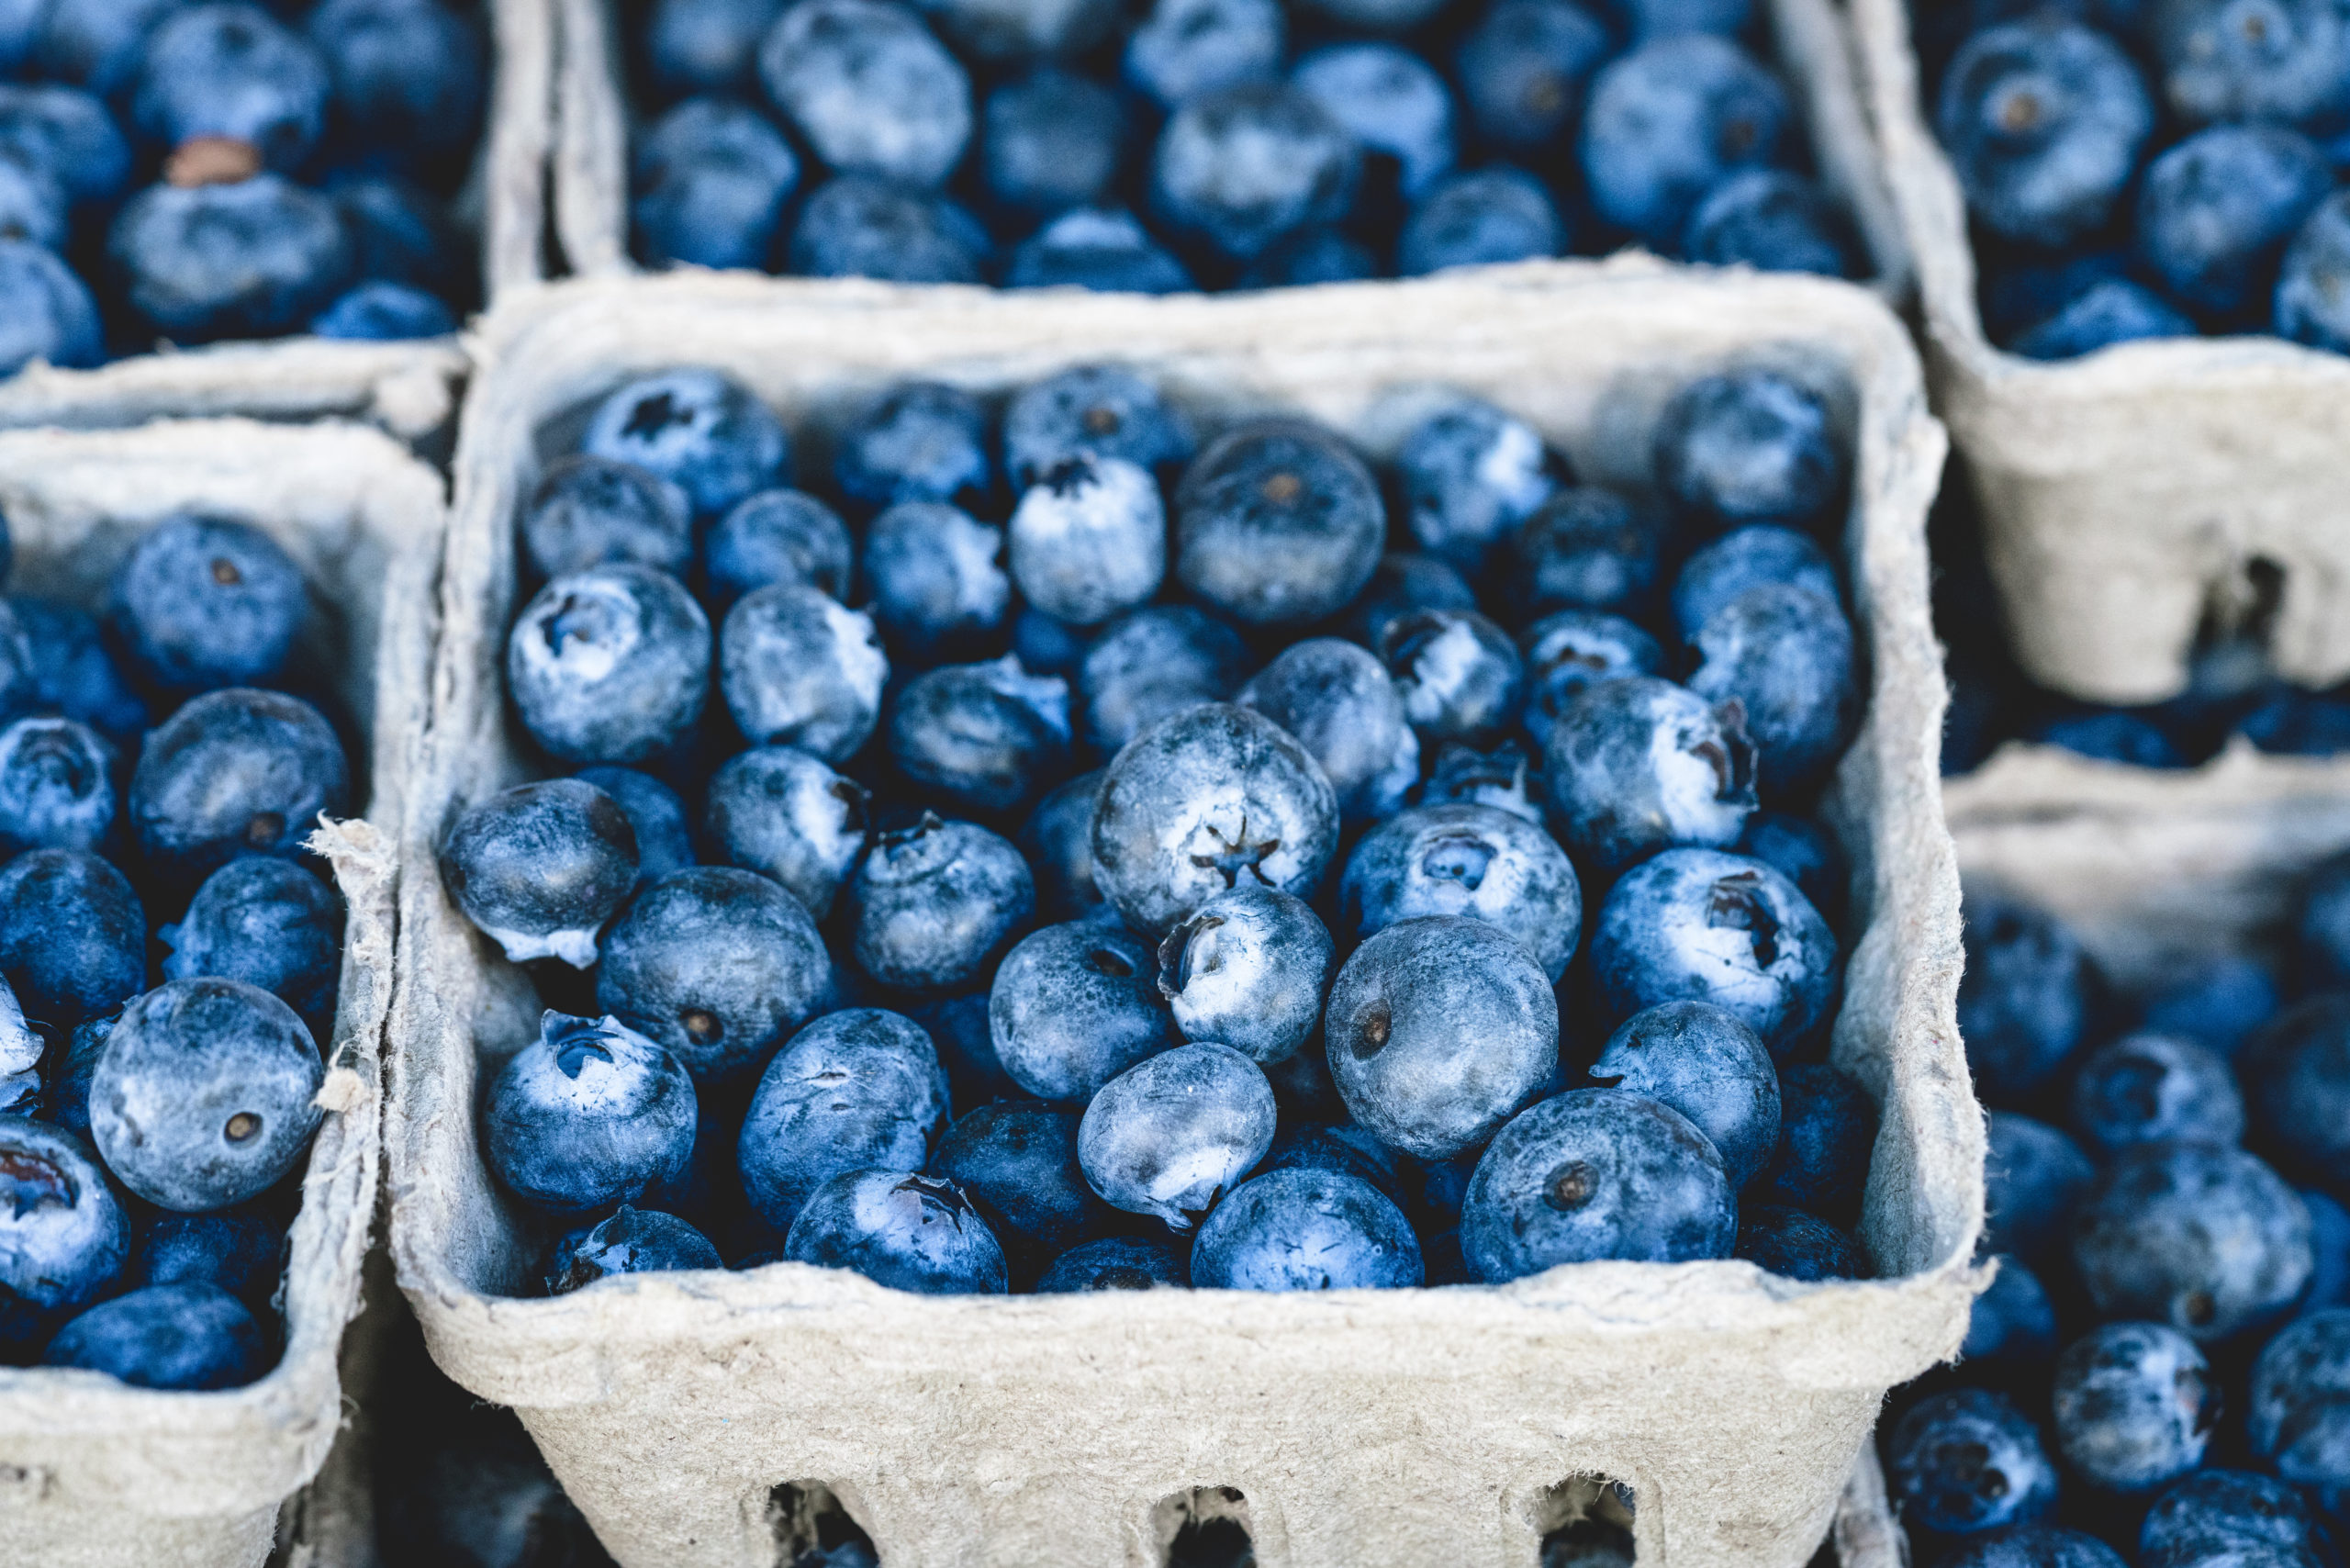 Photo of blueberry fruit in a gray container.